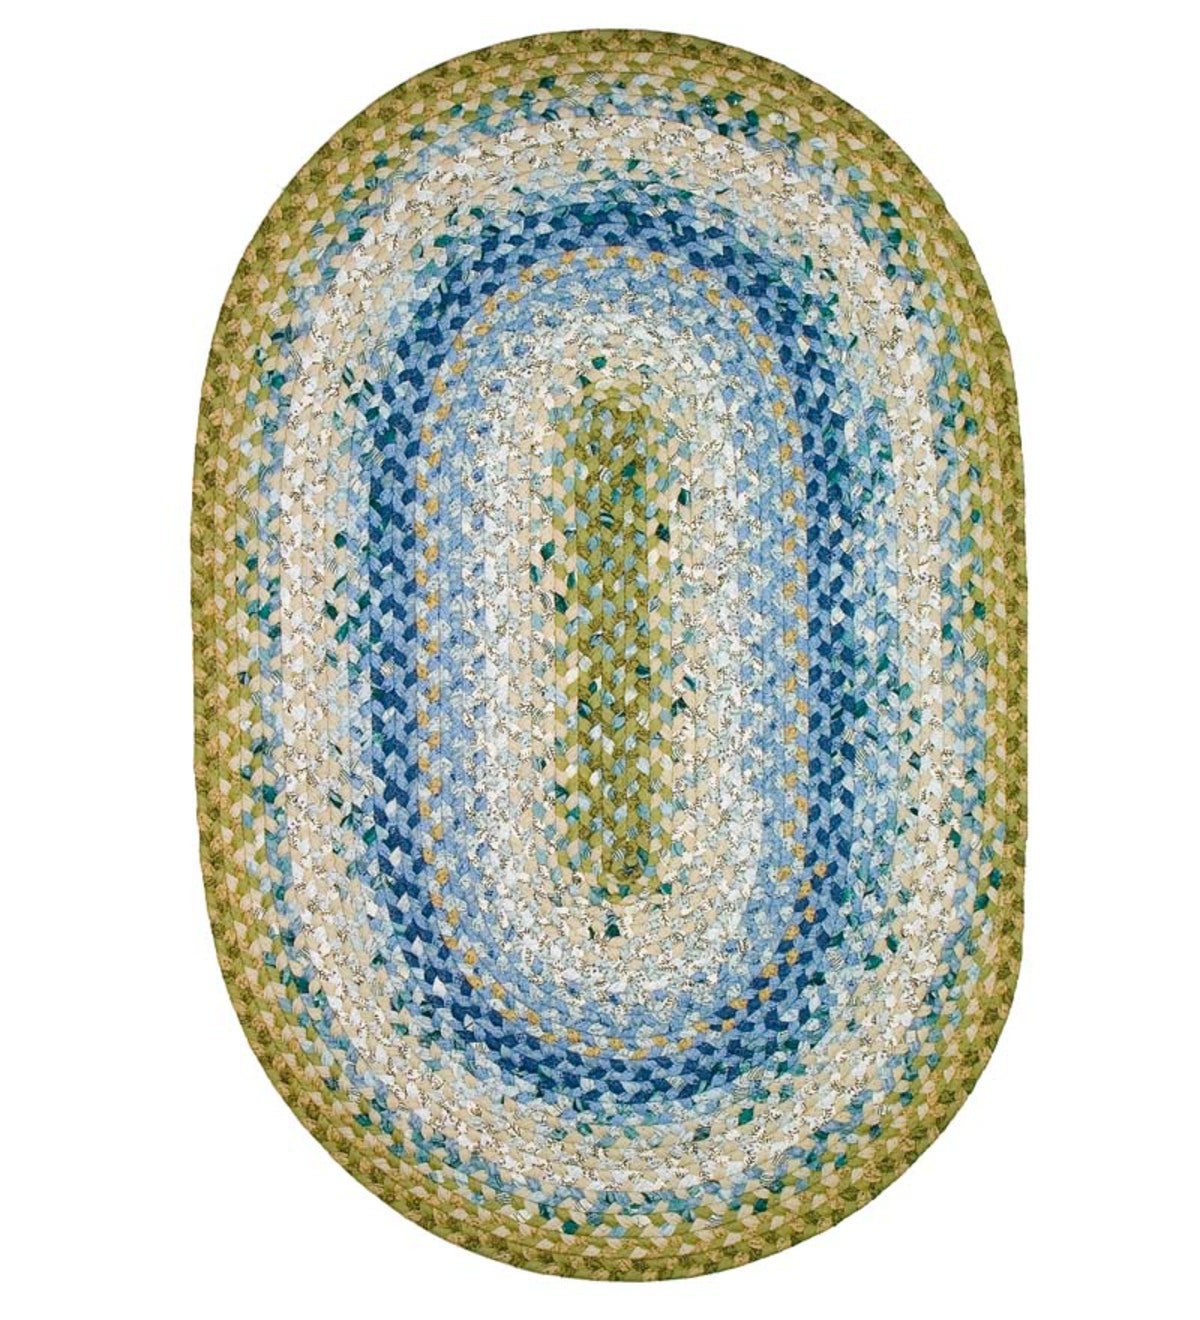 Oval Cotton Blend Braided Rug, 8' x 10' - Seascape